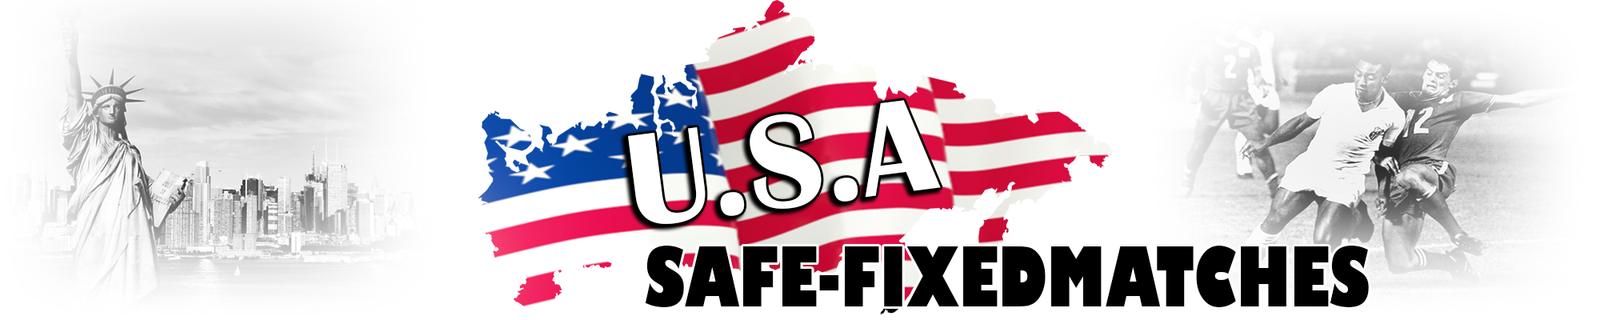 FIXED MATCHES 100% SAFE USA